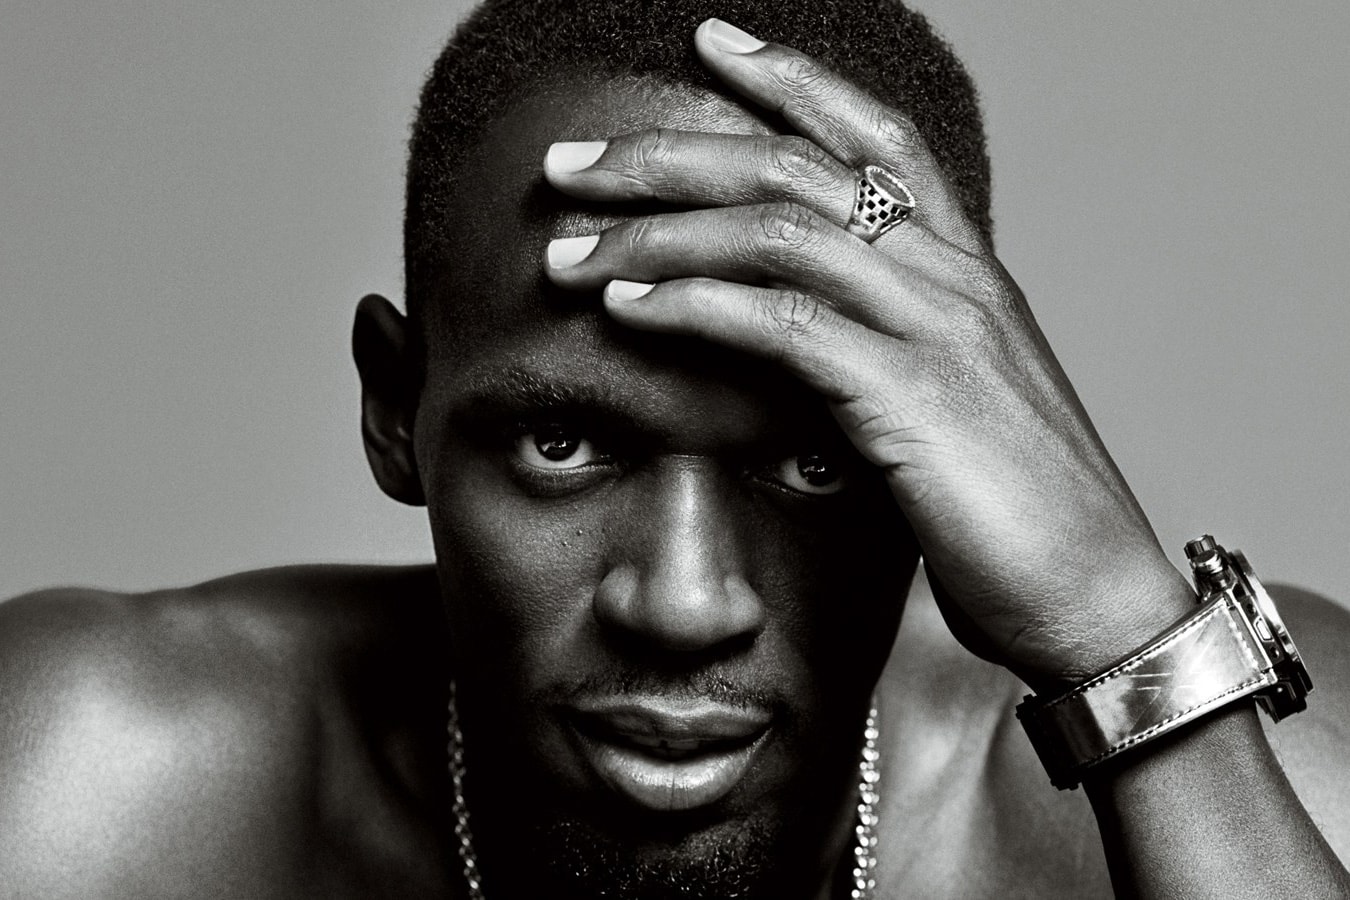 Usain Bolt Opens up About Being "The Greatest Athlete to Live" in new interview 2016 GQ Magazine Olympics Sports